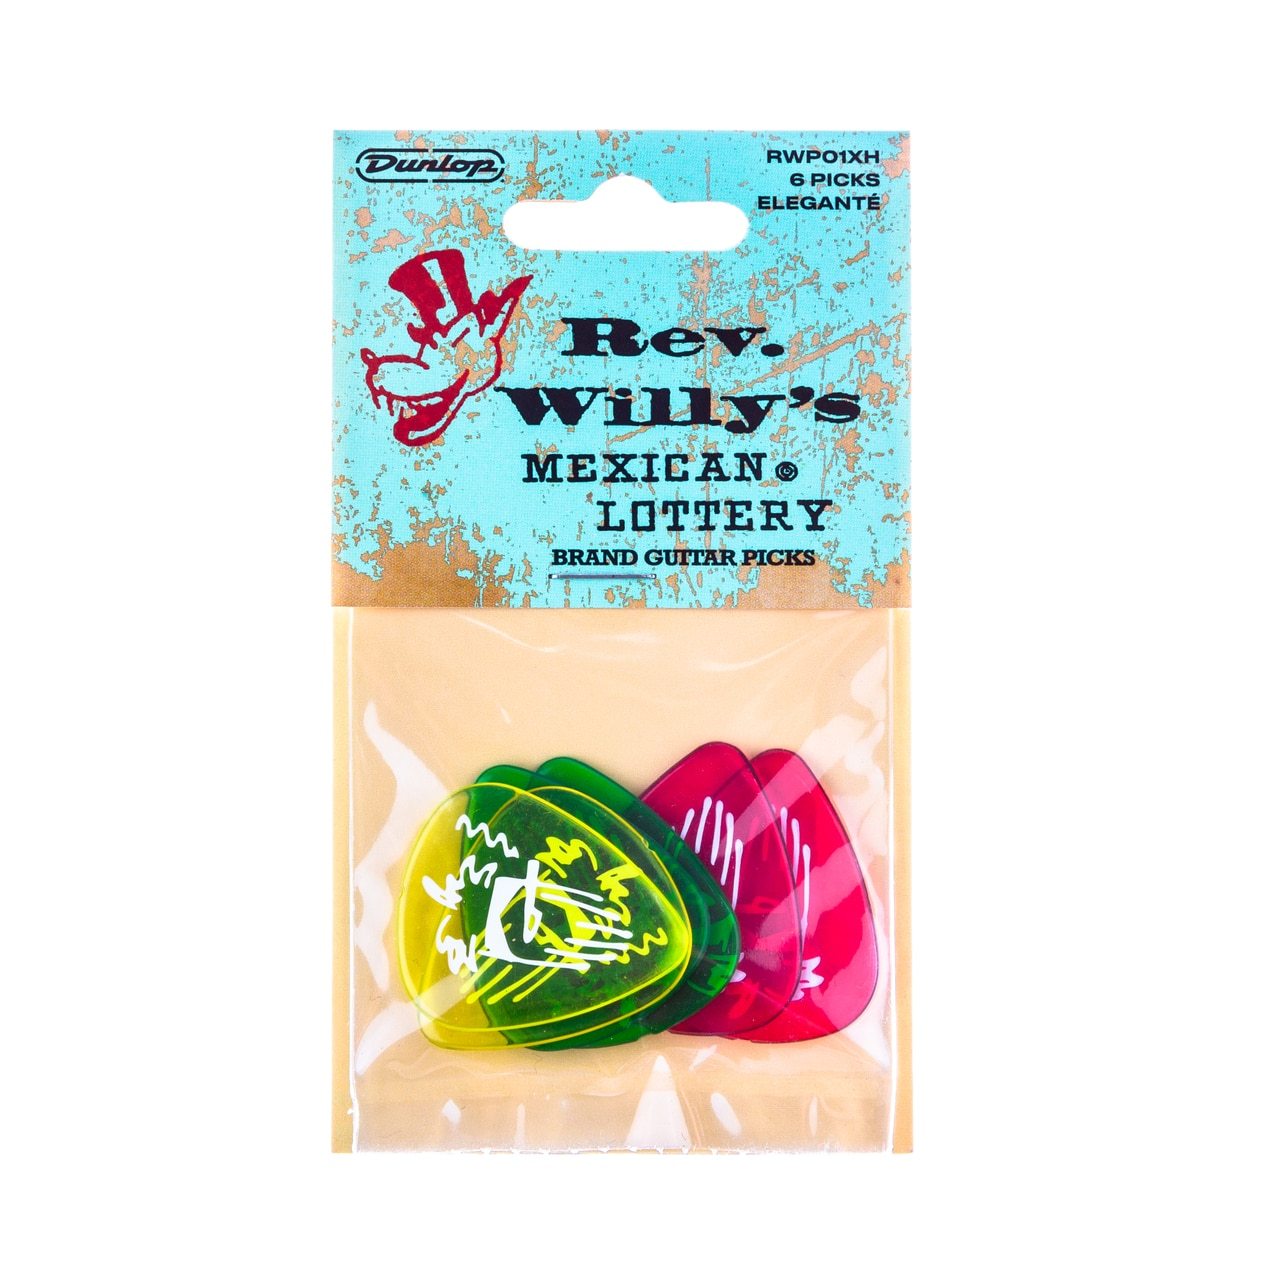 DUNLOP REV. WILLY'S MEXICAN LOTTERY BRAND GUITAR PICKS 24-PACK | RWR01XH